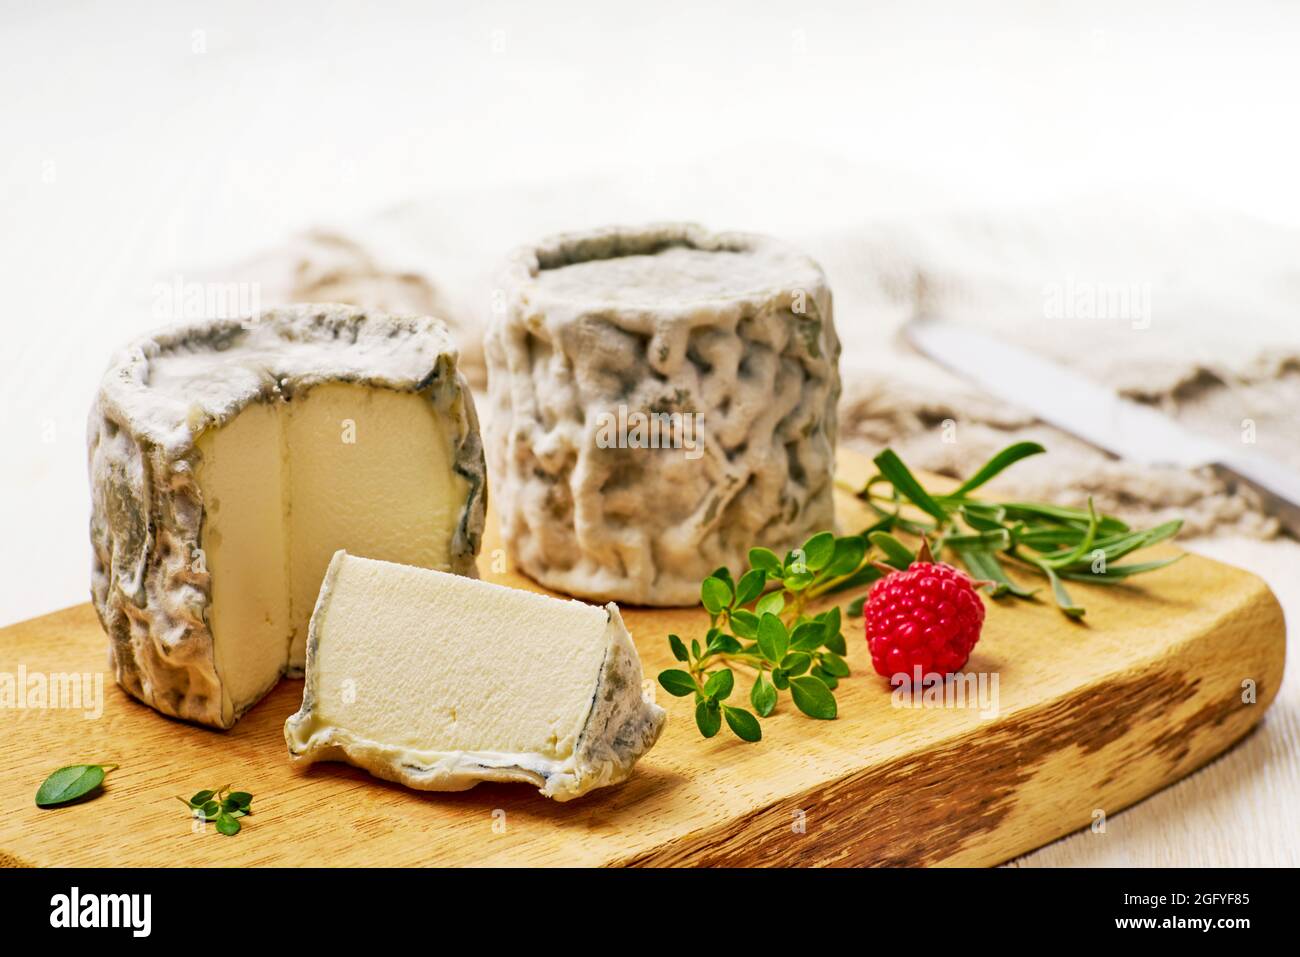 Selles-sur-Cher soft goat-milk cheese on wooden board over white Stock Photo